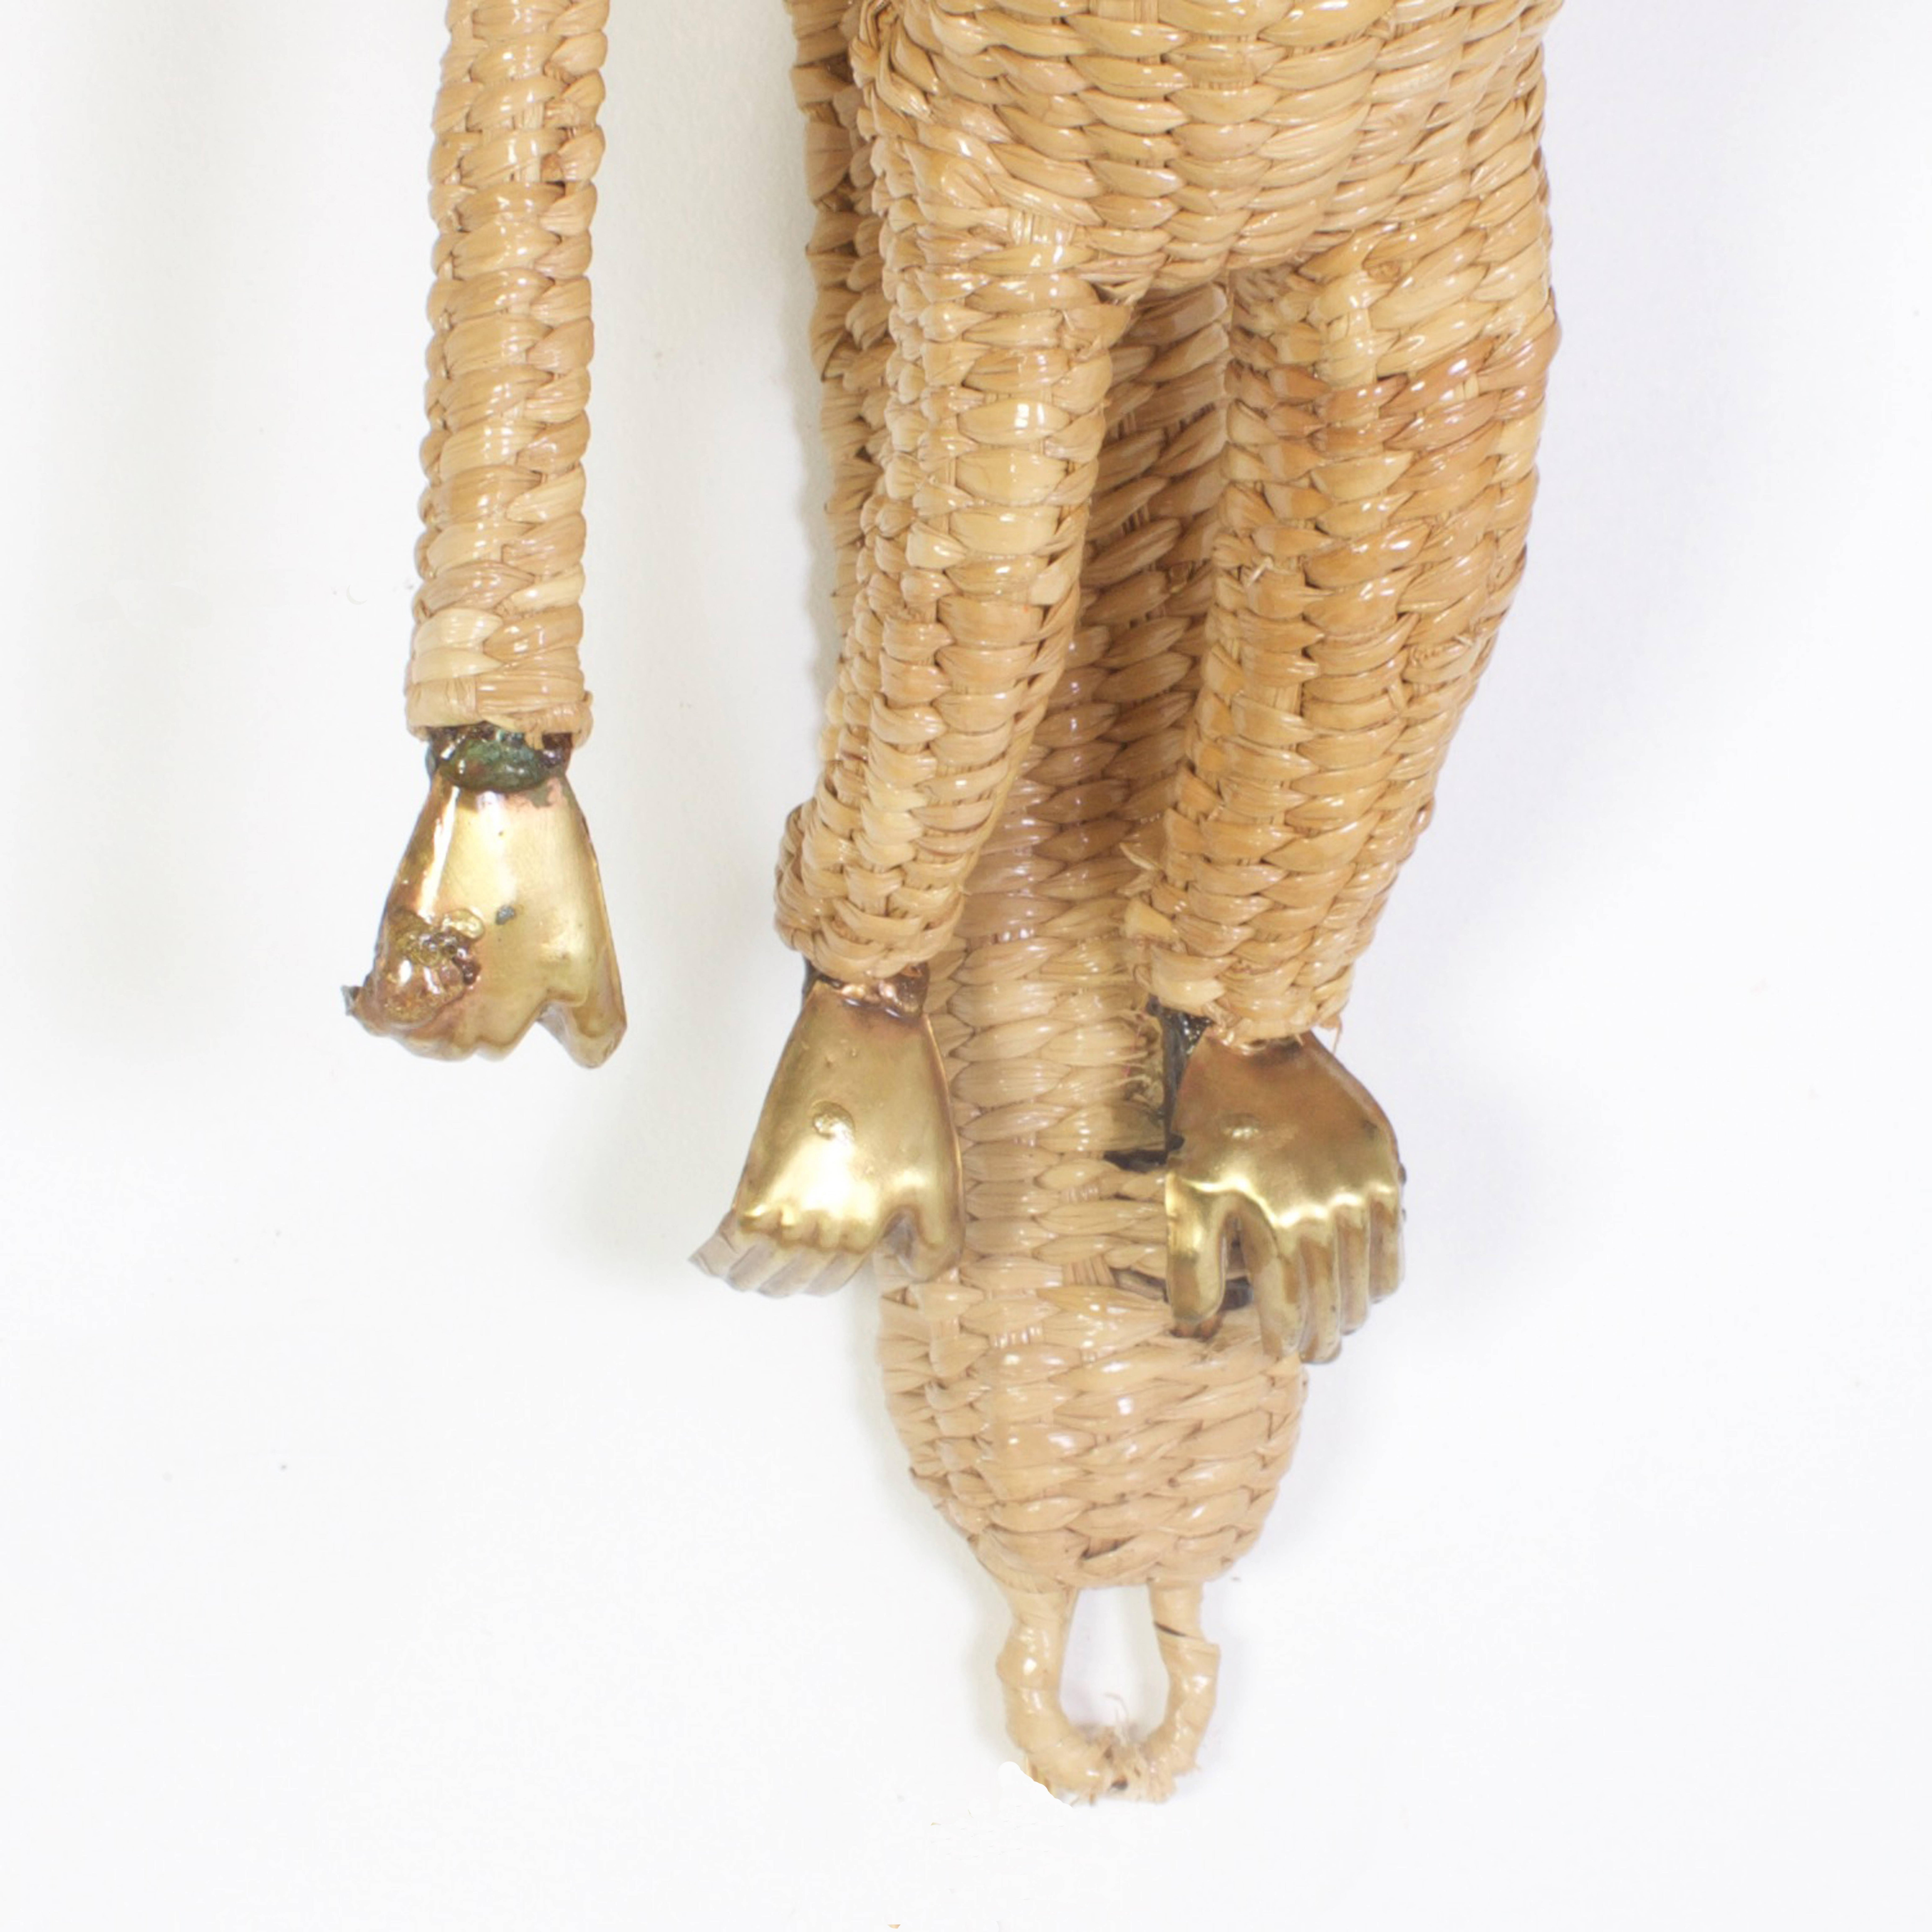 Amusing Pair of Mario Torres Wicker Monkey Sconces with Palm Leaves 2